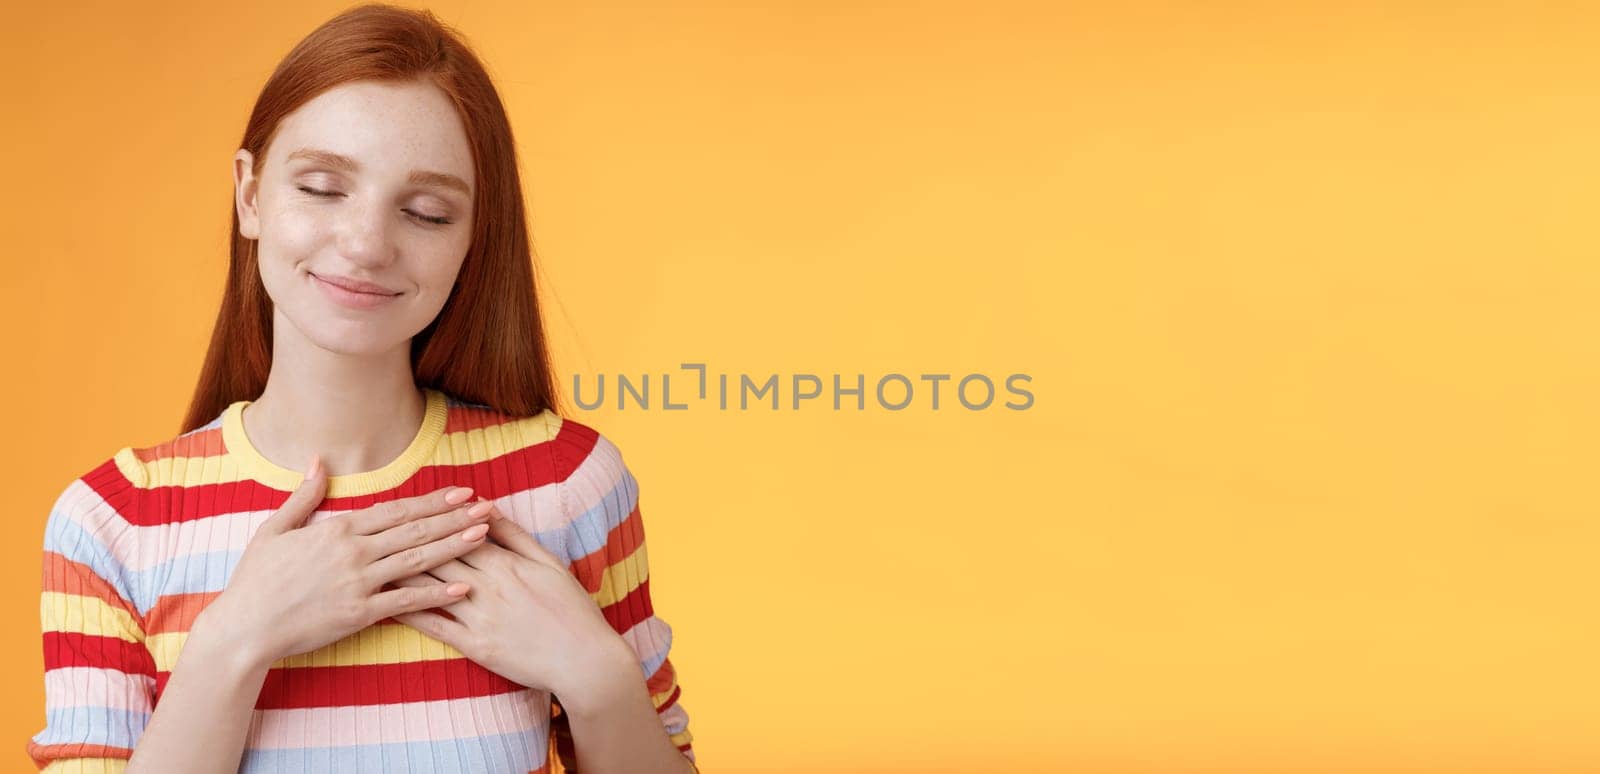 Heart keeps warm save dearest memories inside. Smiling tender heartwarming redhead lovely girl touch chest grinning closed eyes recall lovely nice moment standing romantic orange background.